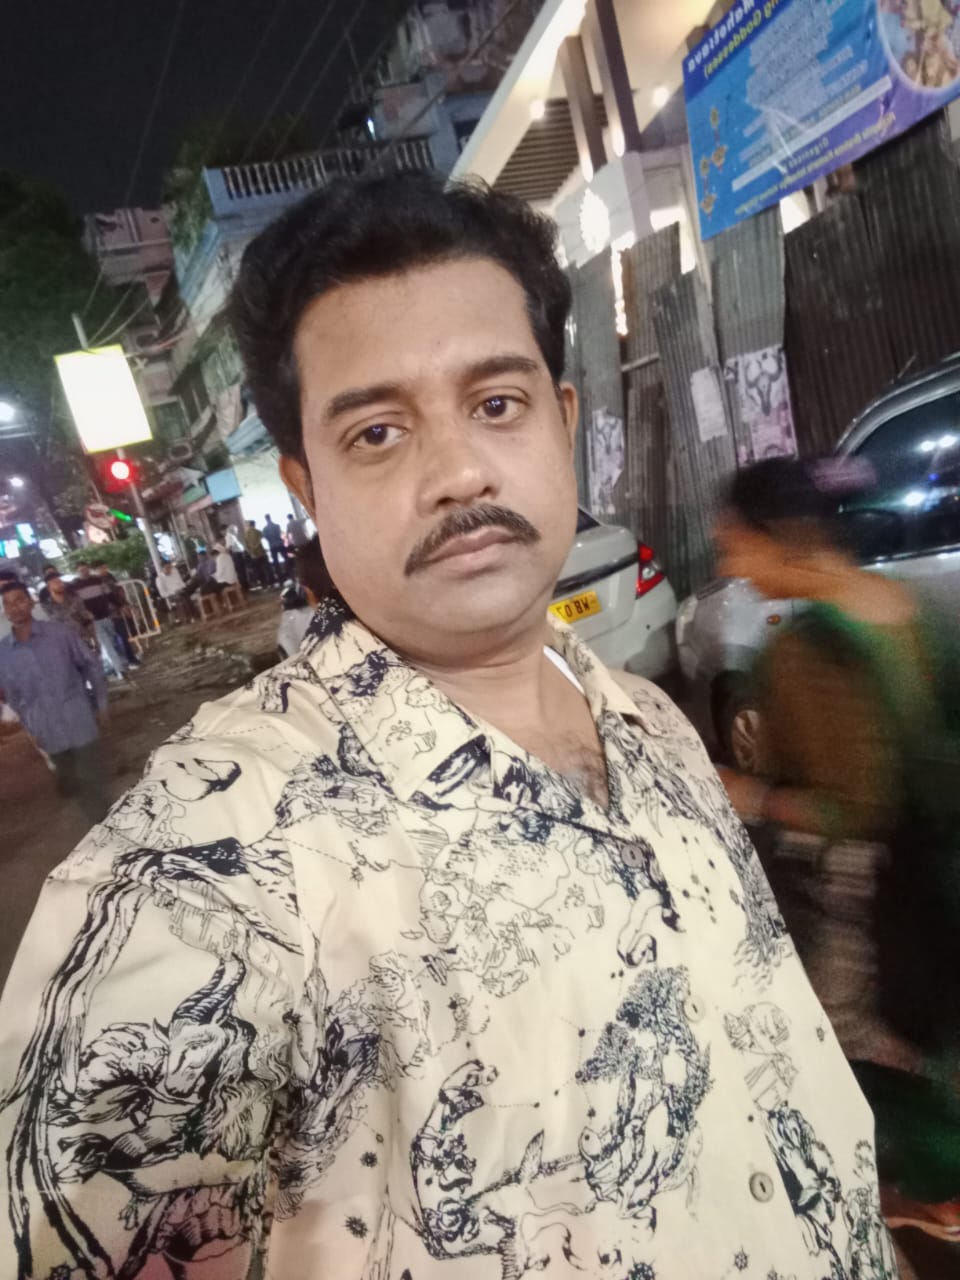 Looking for our son Somnath Gupta 44 yrs divorce, Kolkata, MBA Baidya. Working in a manufacturing industry, salary is Rs. 30000/- per month with also does private tutions. 

Bride must be from normal family of same caste around 38 yrs. Call 9674228392.